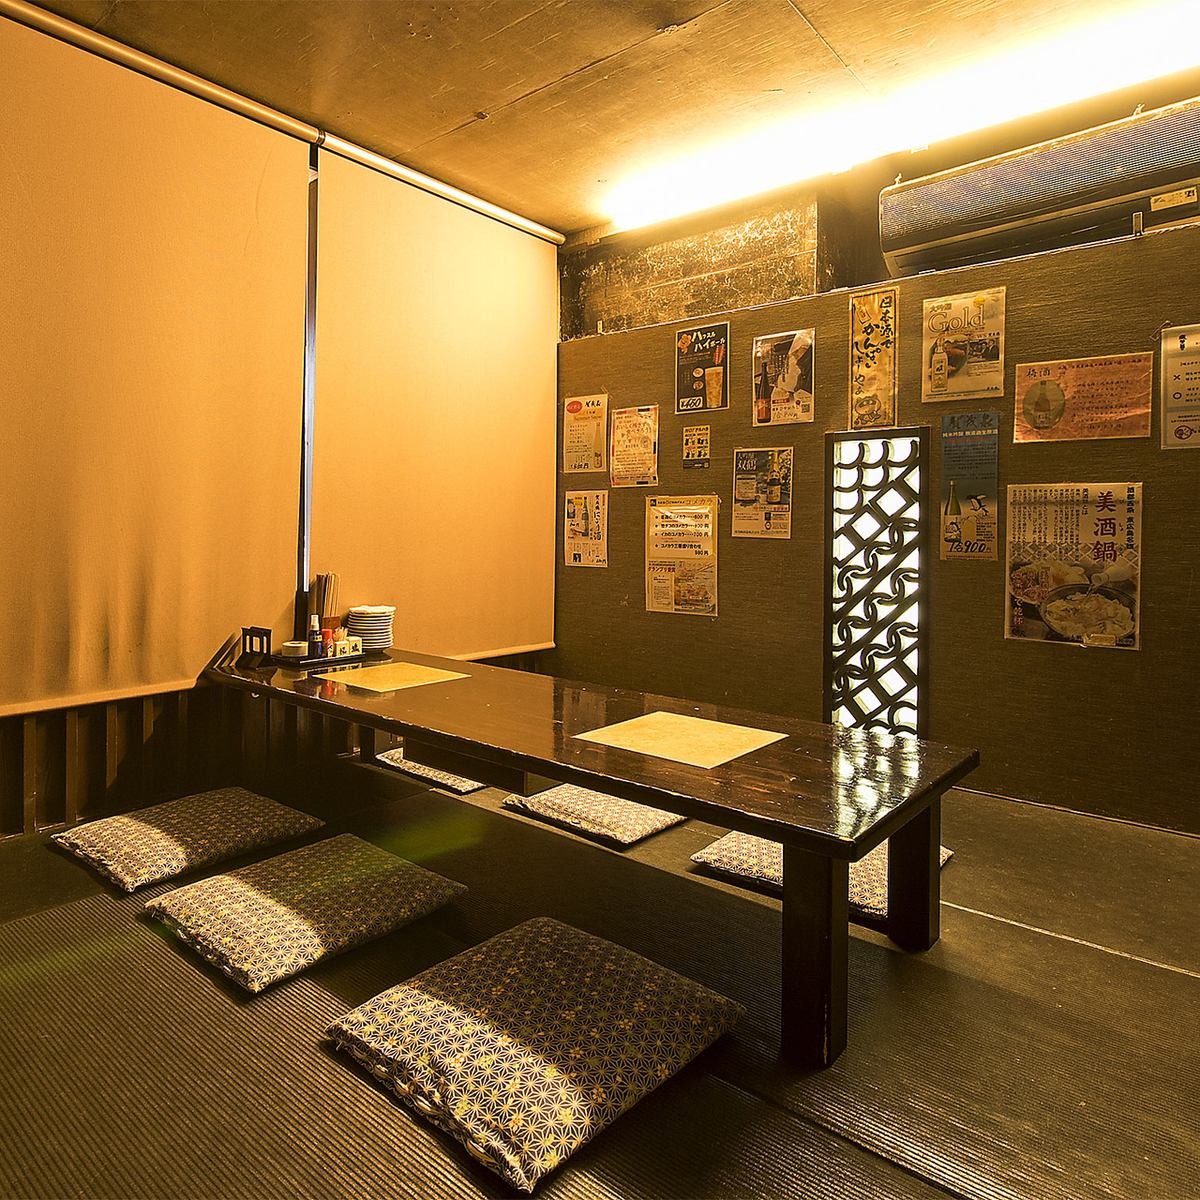 The private tatami room has seating for 4 and 6 people!